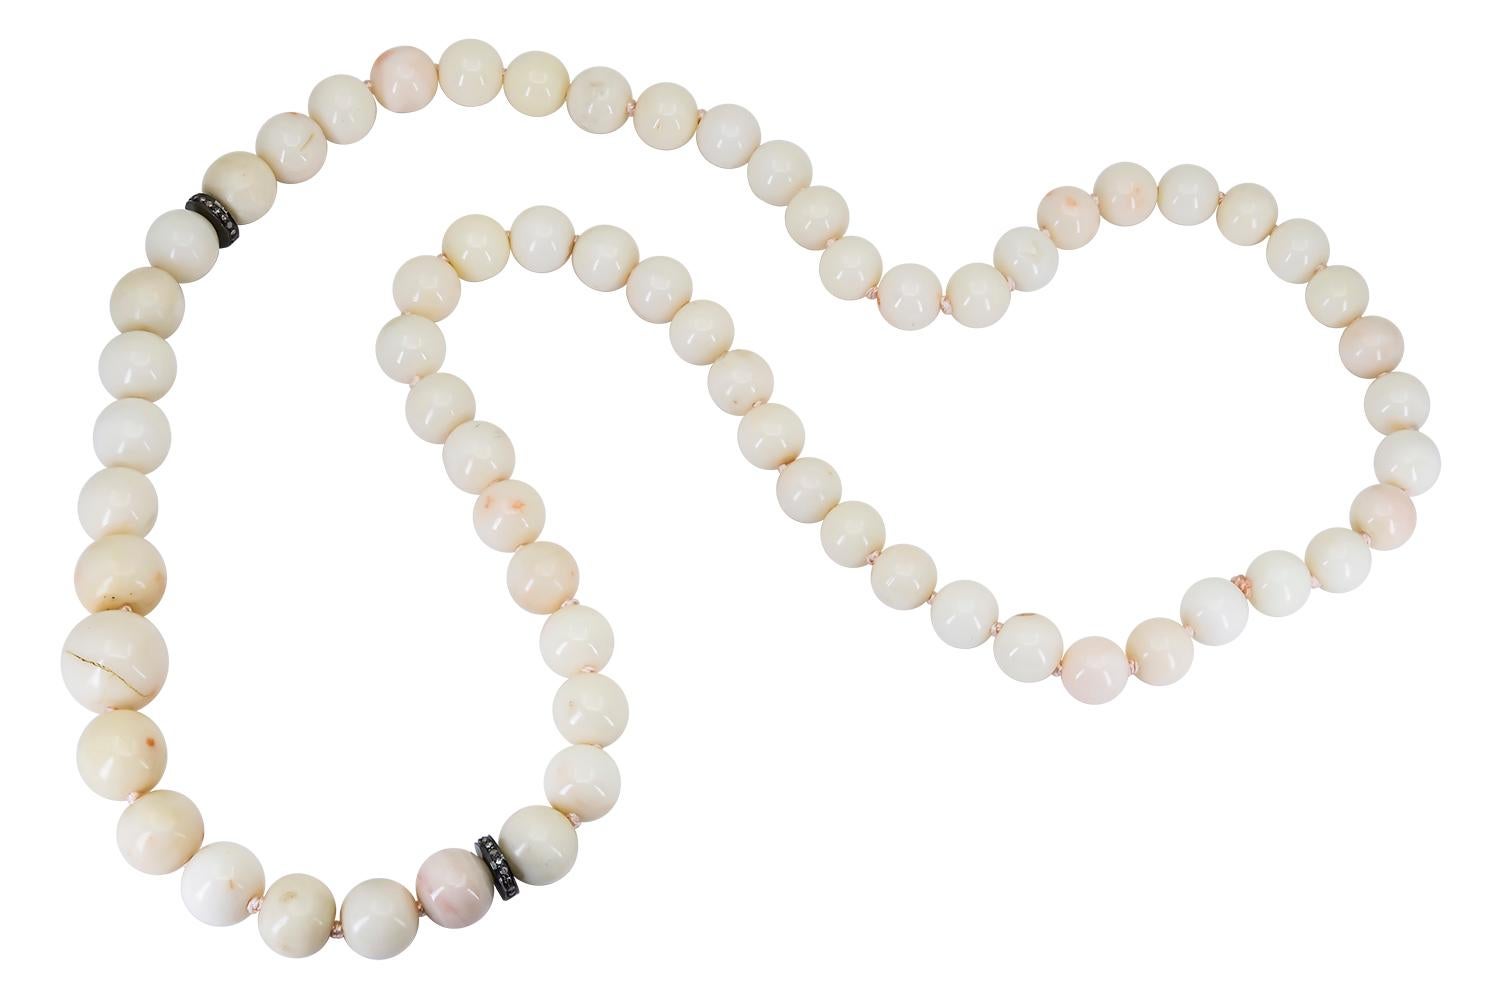 These White Coral beads were purchased as part of an estate before being made into this classic 24 inch graduated hand strung White Coral Necklace with sizes that range from
 8.5 - 13.5 mm each. These Natural Ocean Gems are separated by 2 Rhodium